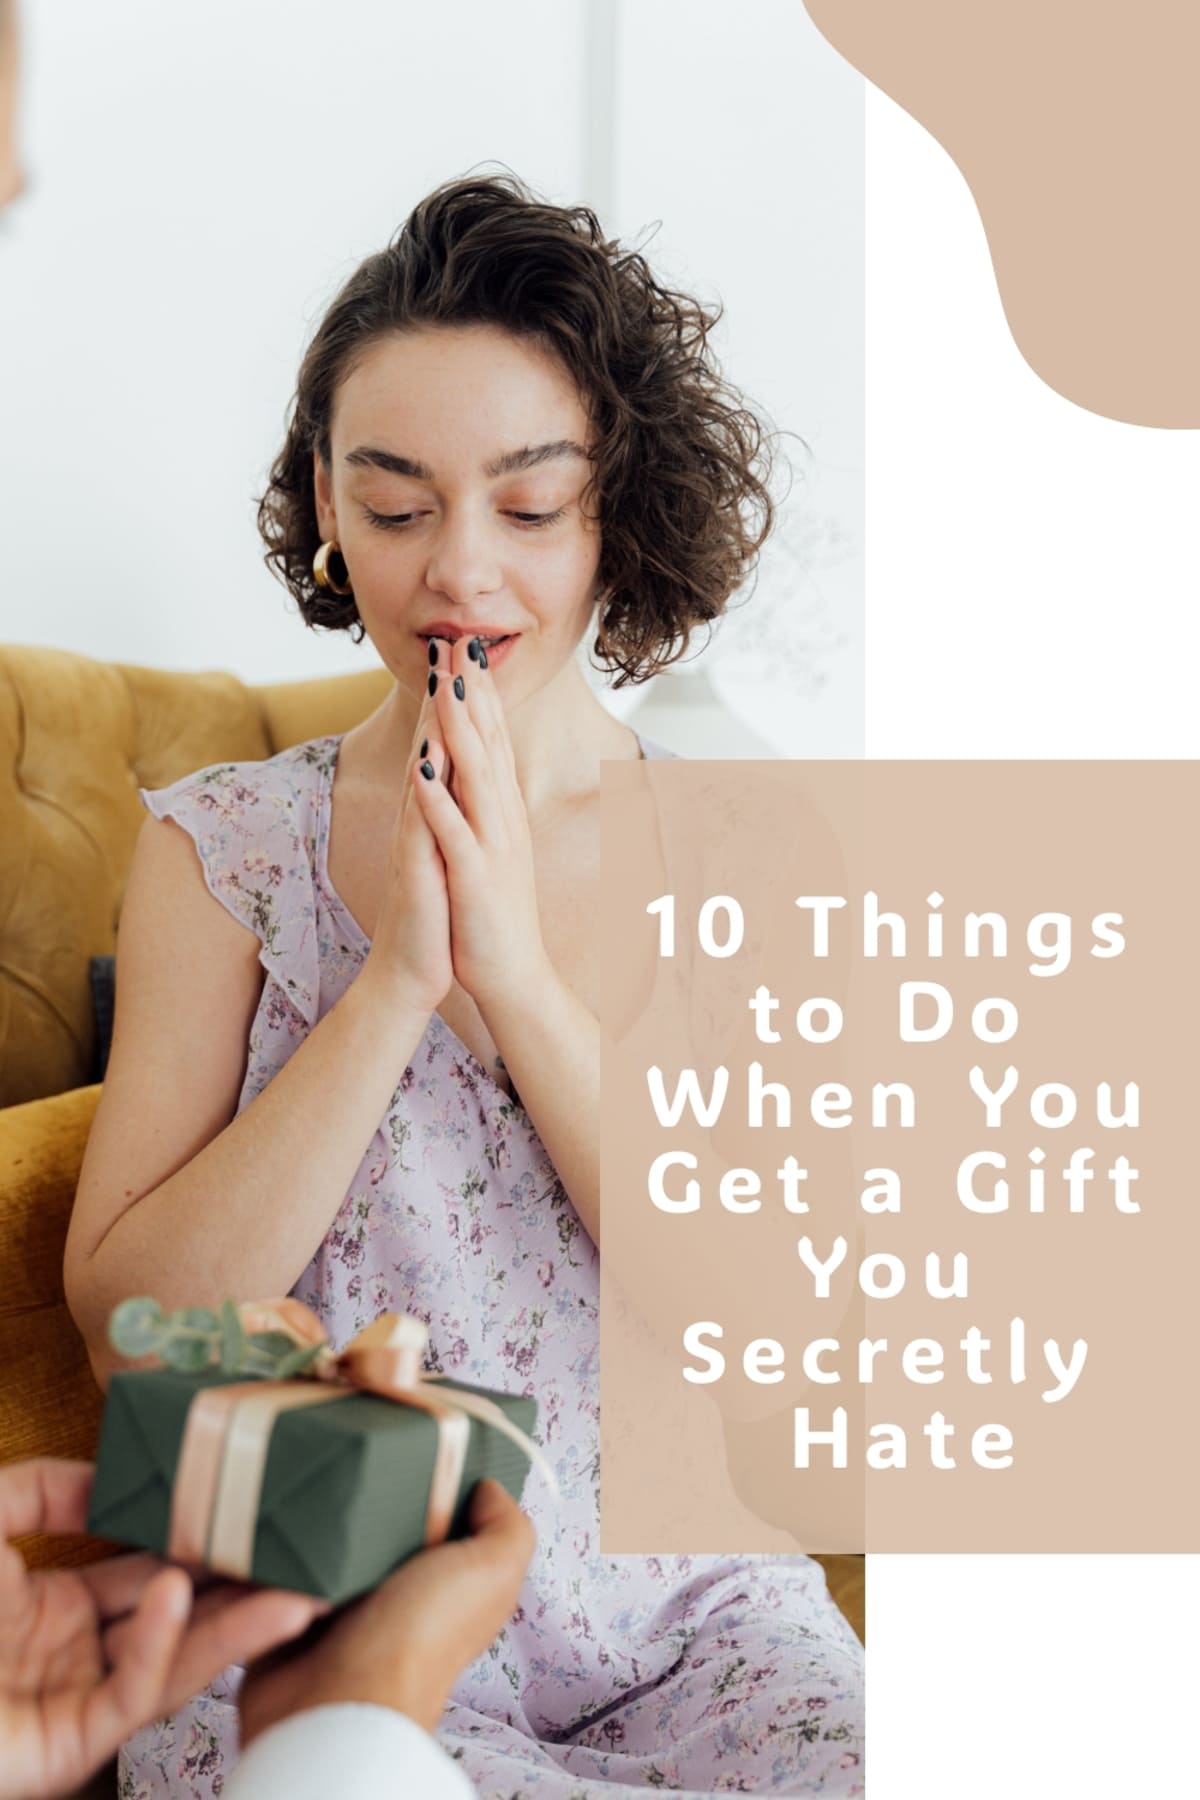 10 Things to Do When You Get a Gift You Secretly Hate